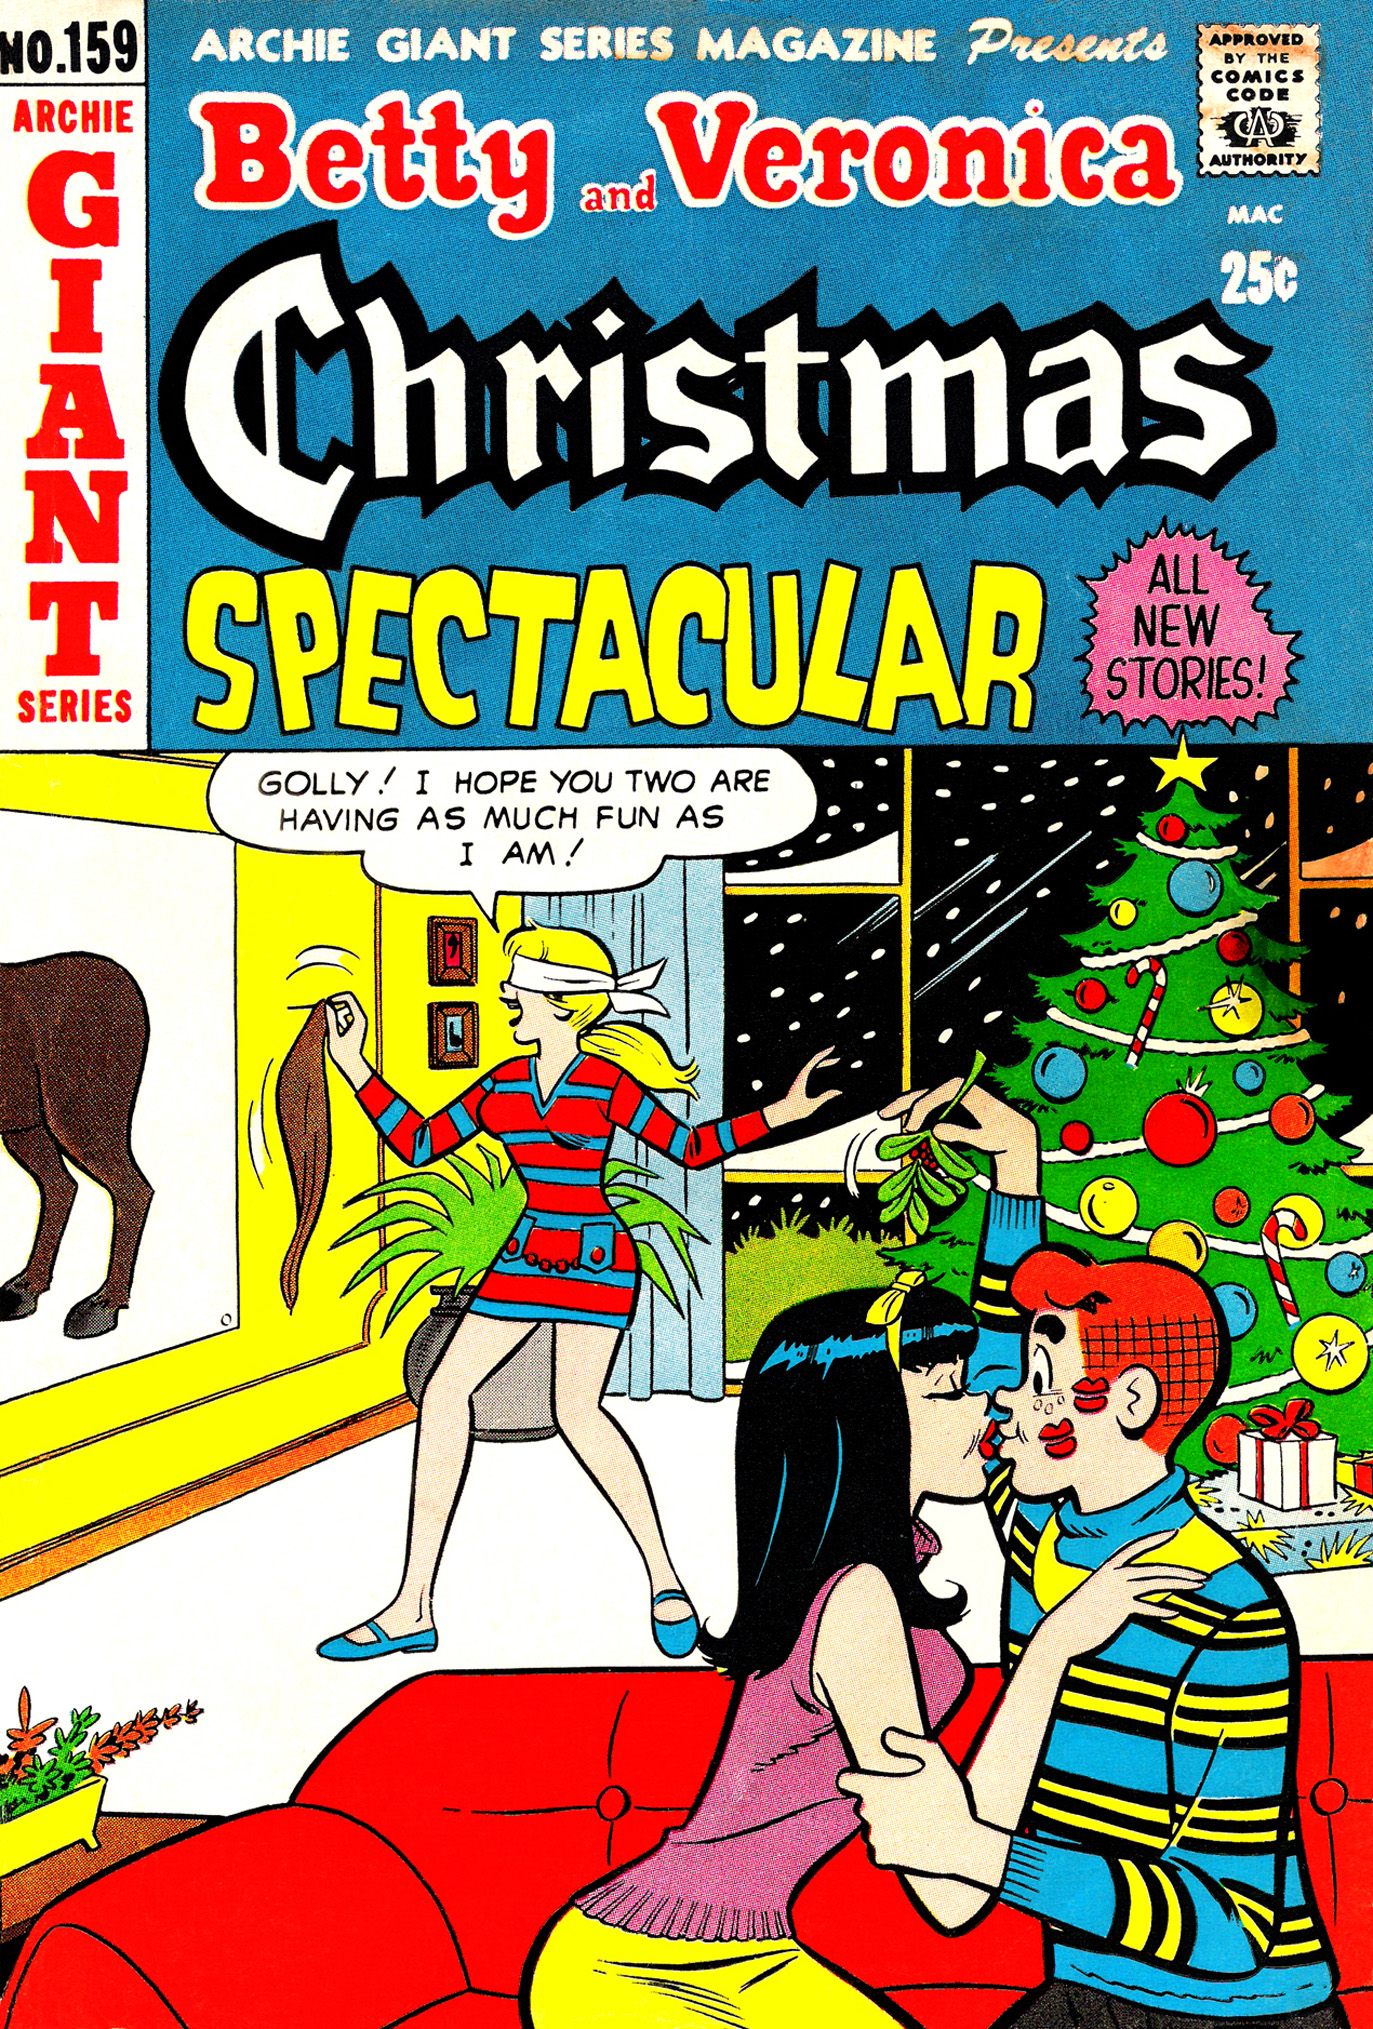 Read online Archie Giant Series Magazine comic -  Issue #159 - 1